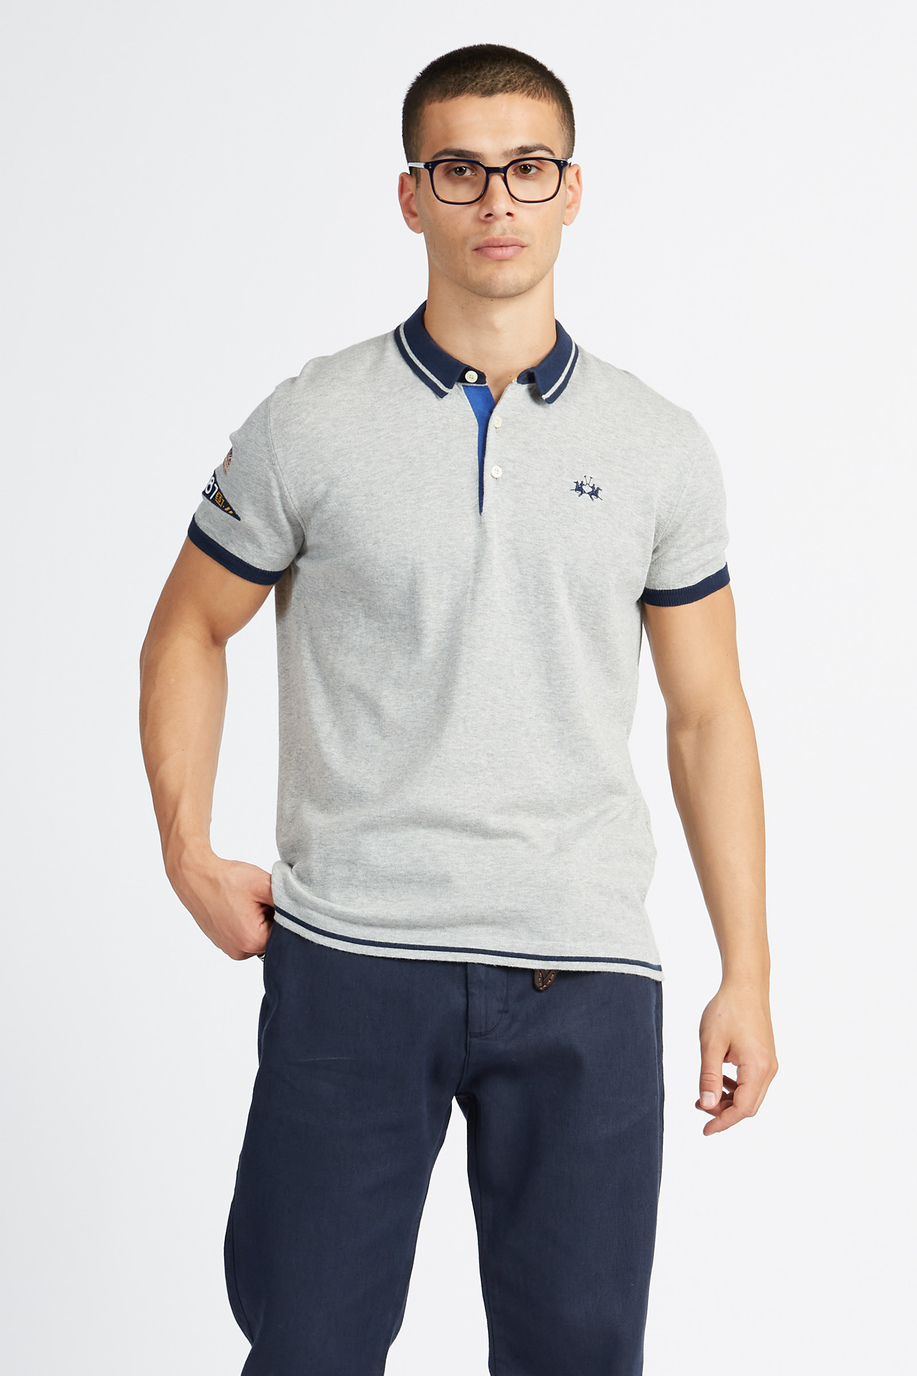 Short-sleeved men's tricot polo in solid color - Victorin - Giftguide | La Martina - Official Online Shop